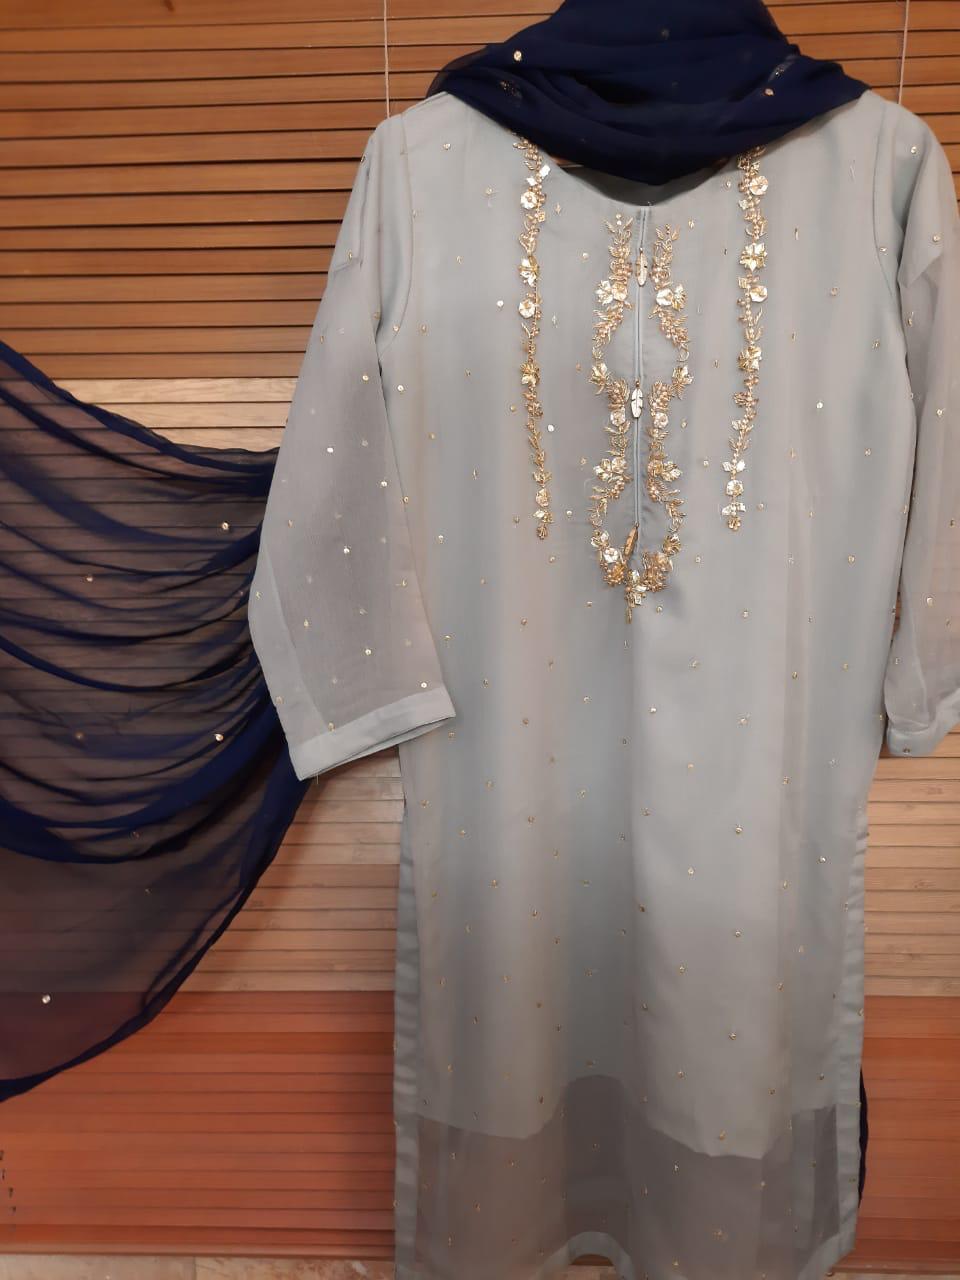 agha noor dresses 2019 with price